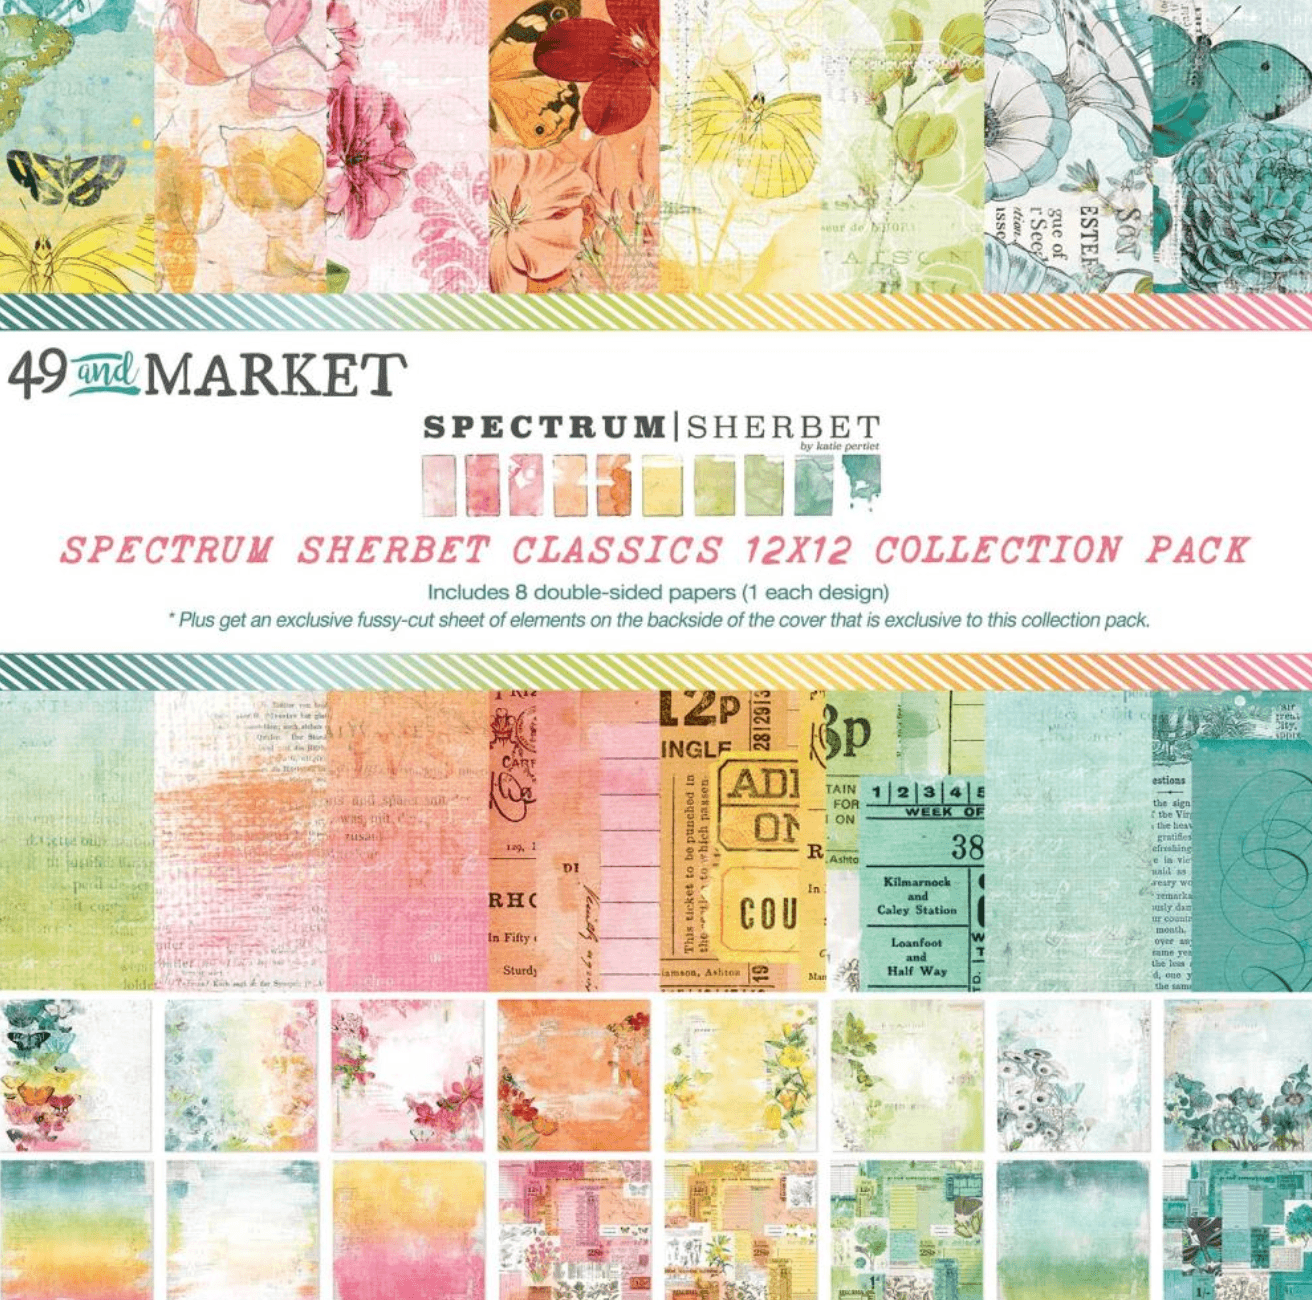 49 and Market - Spectrum Sherbet Classic Collection - 12x12 Inch - Messy Papercrafts